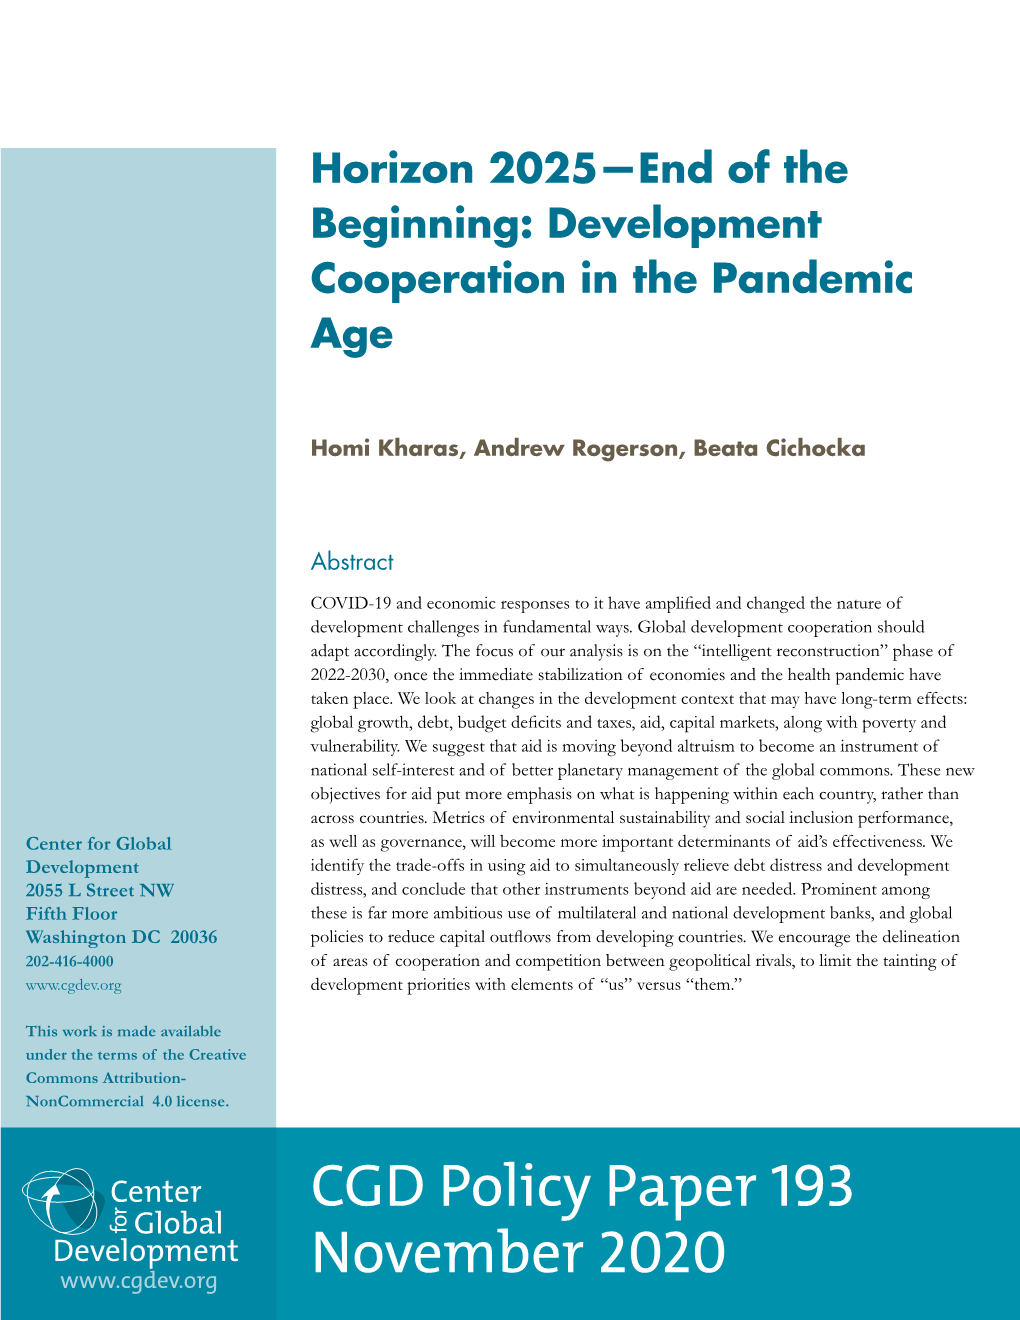 Horizon 2025—End of the Beginning: Development Cooperation in the Pandemic Age